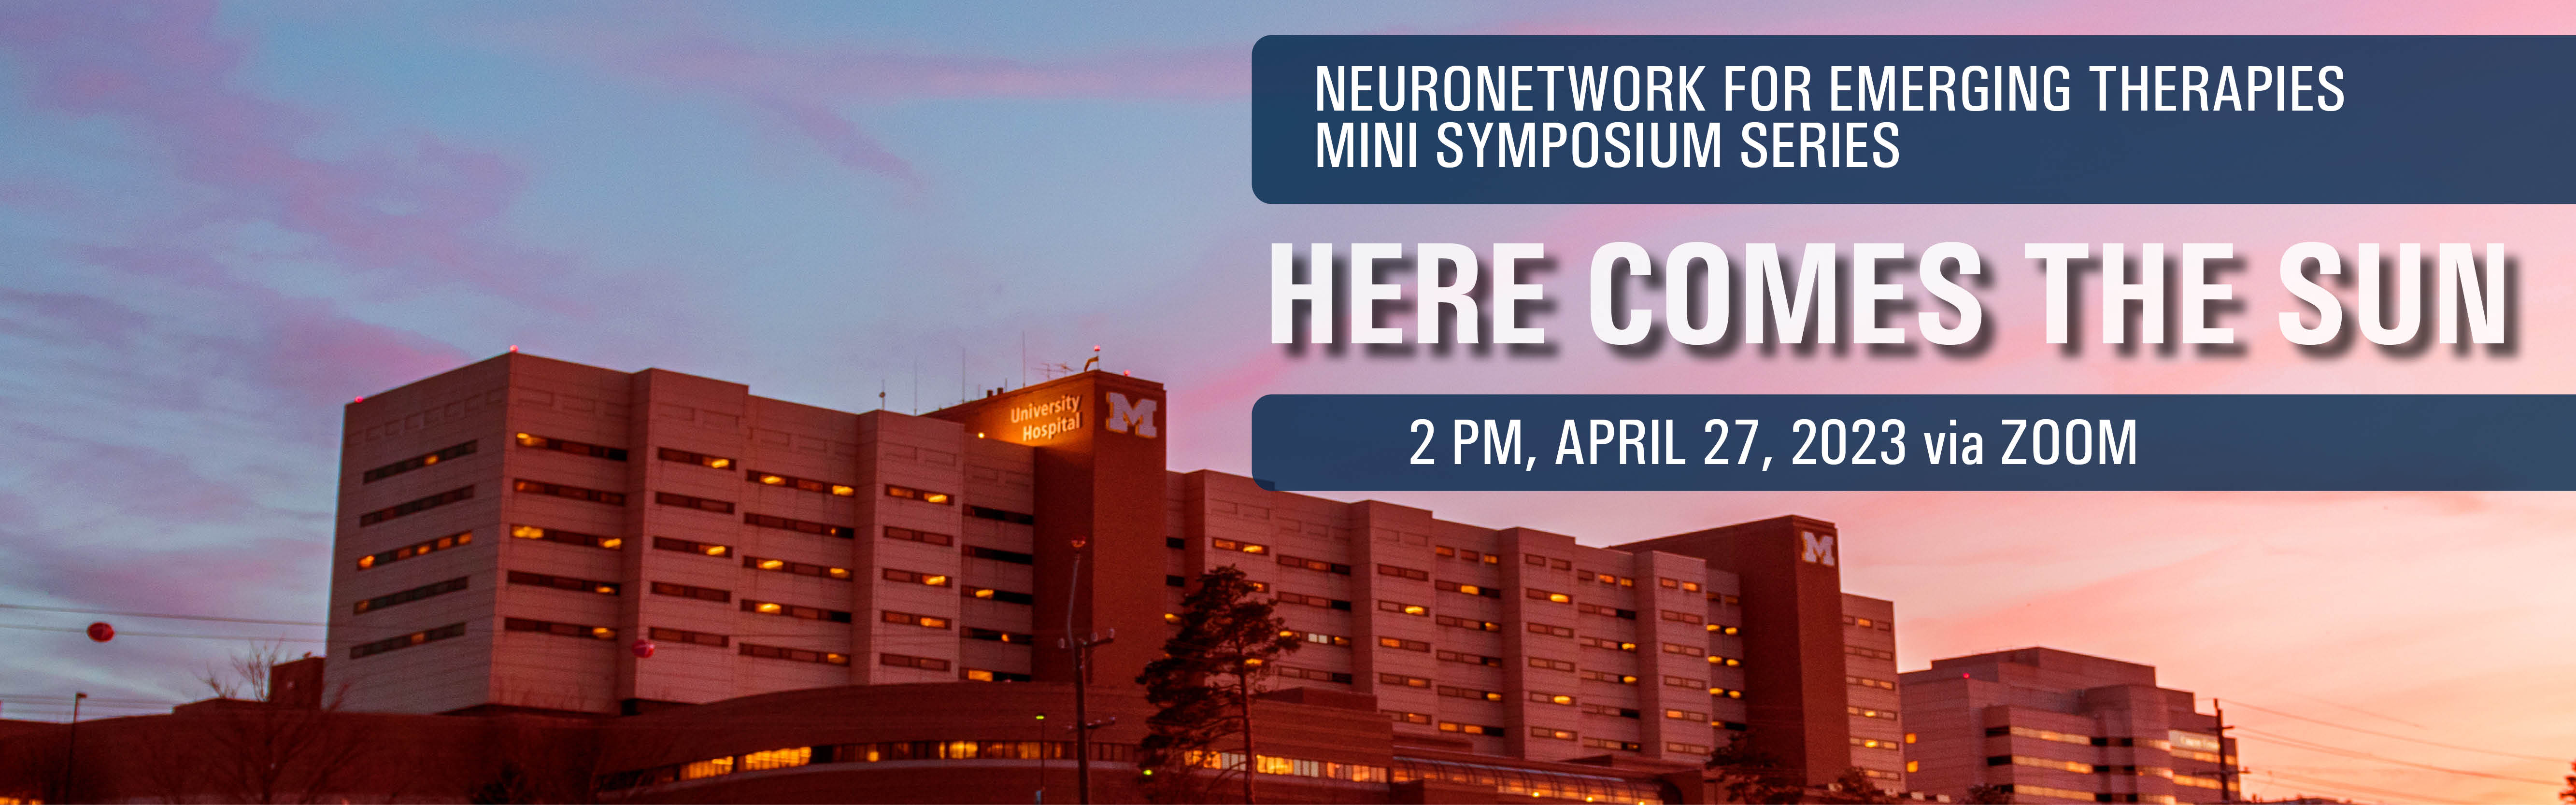 NeuroNetwork for Emerging Therapies Mini Symposium Series: Here Comes the Sun event banner